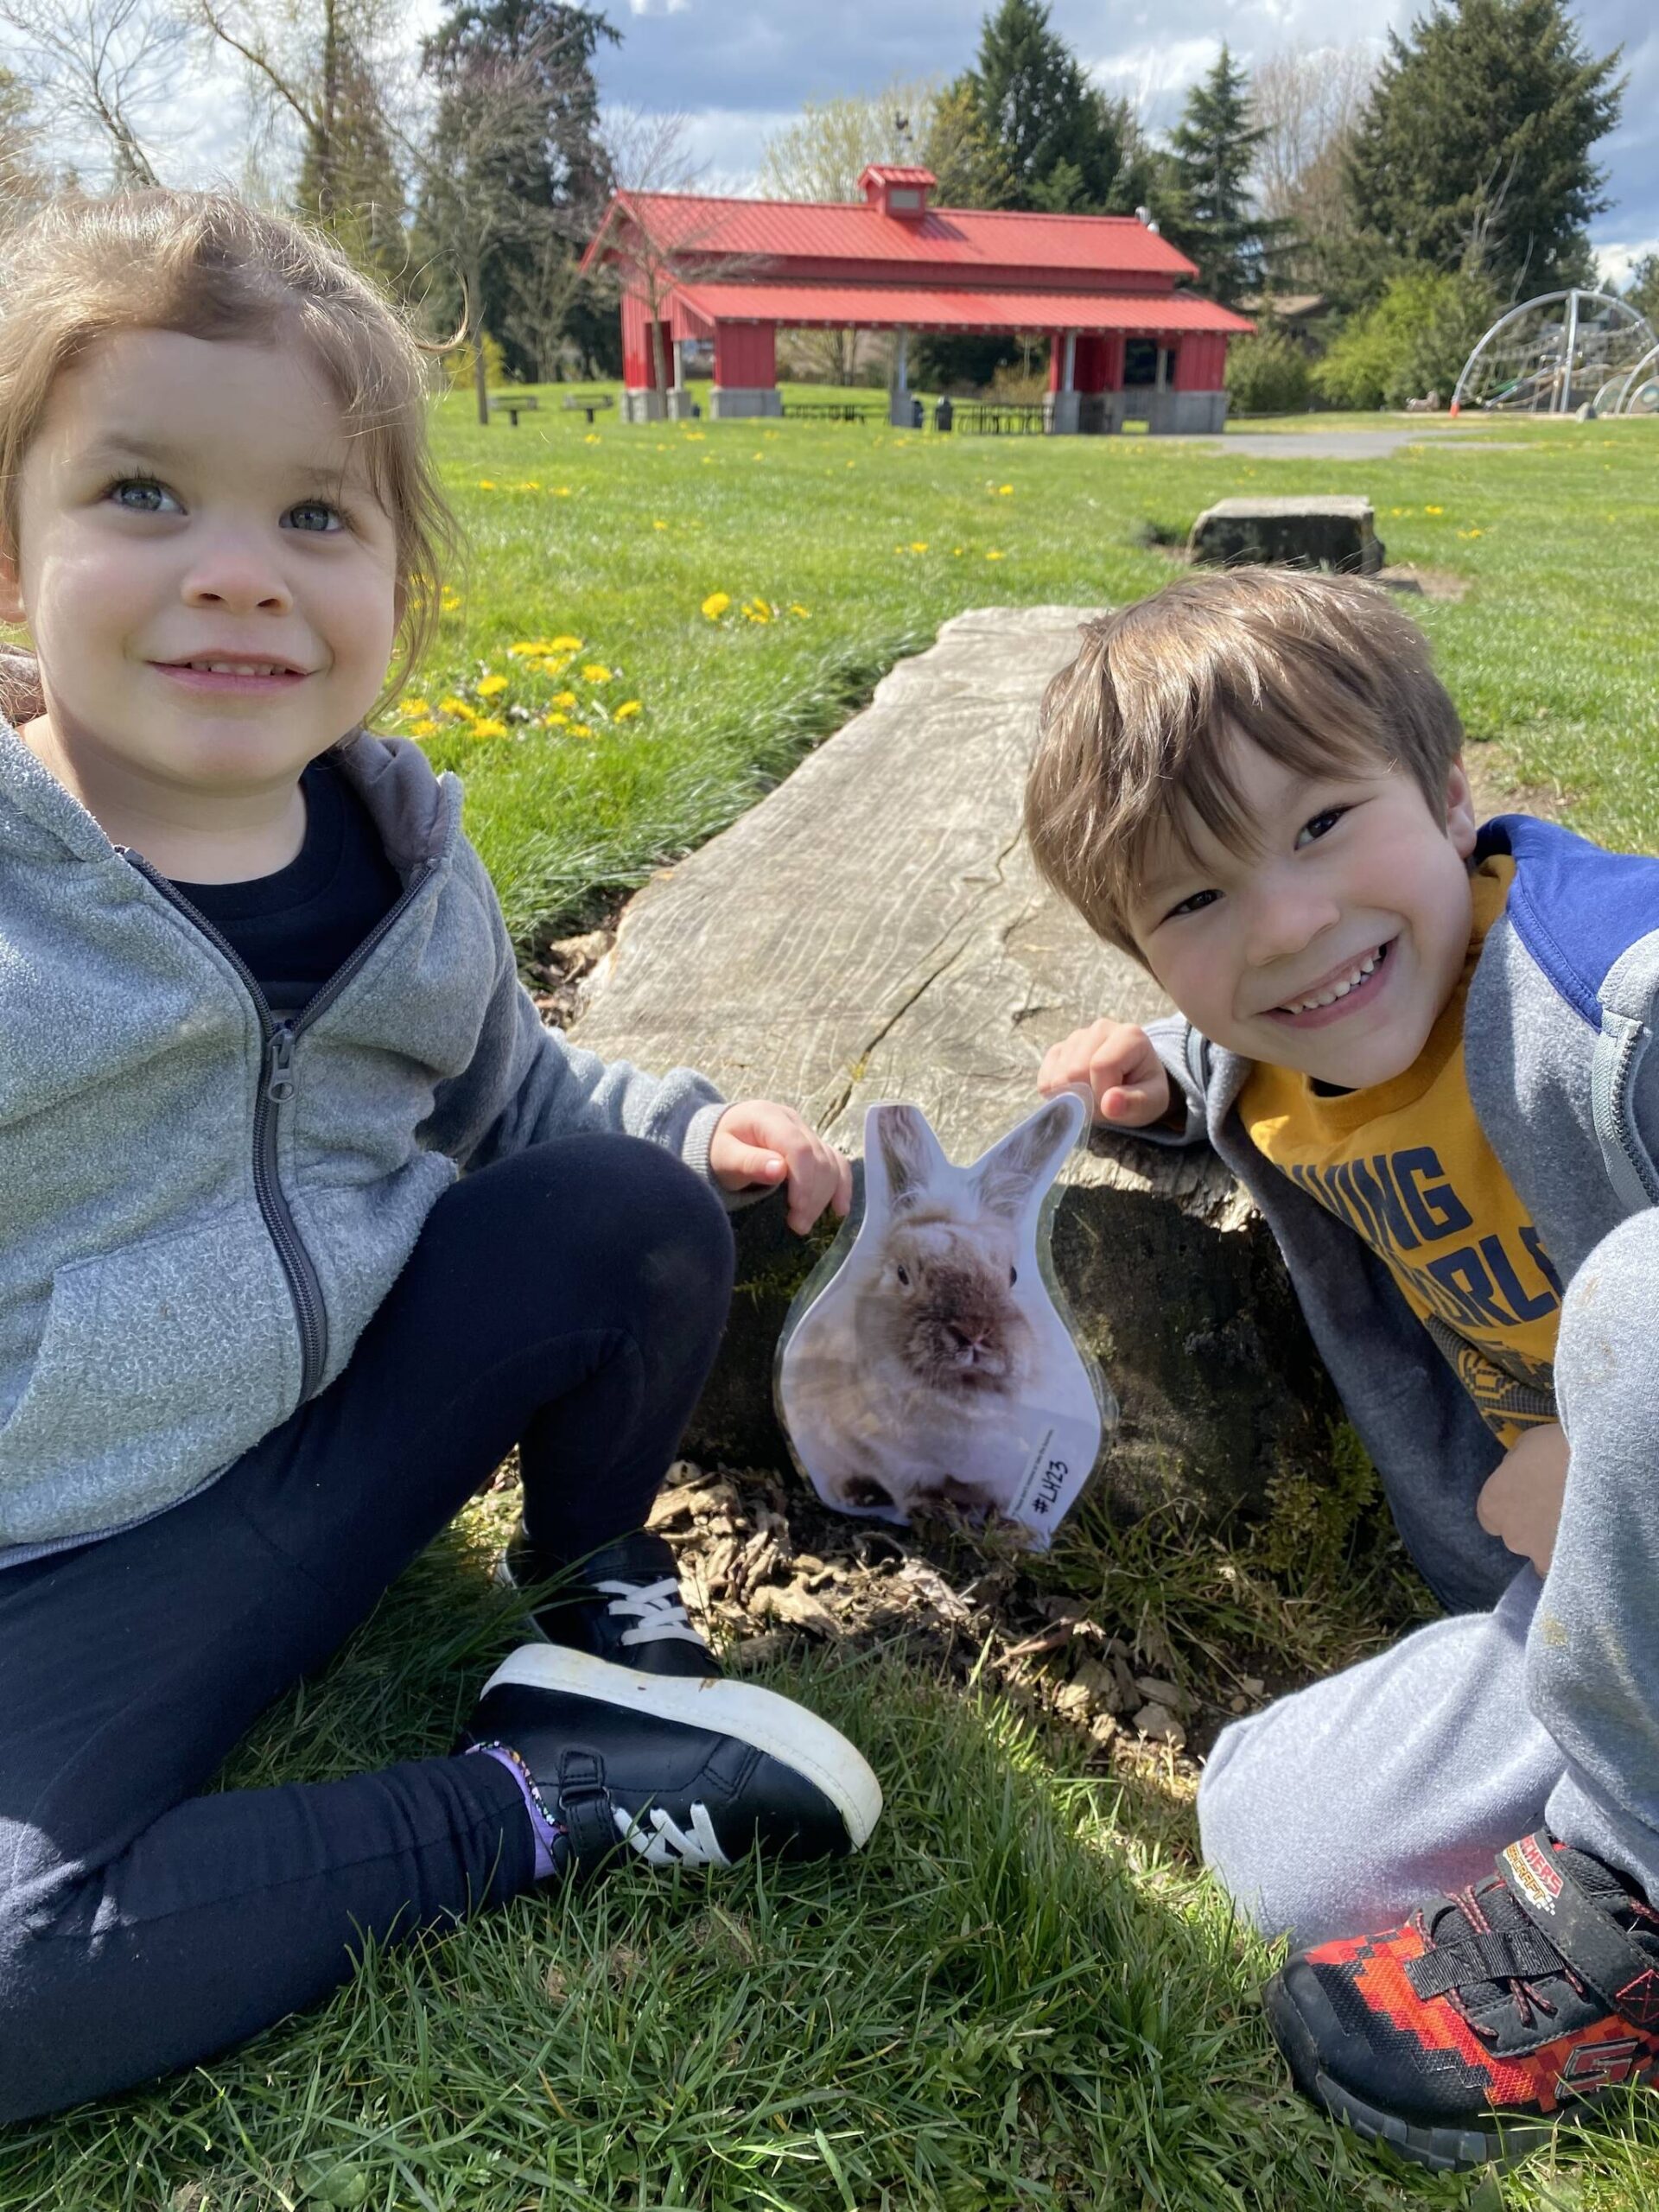 A couple of past participants in the Peter Cotton Trail event smile at their discovery of the elusive bunny. Photo courtesy of Auburn Parks, Arts and Recreation